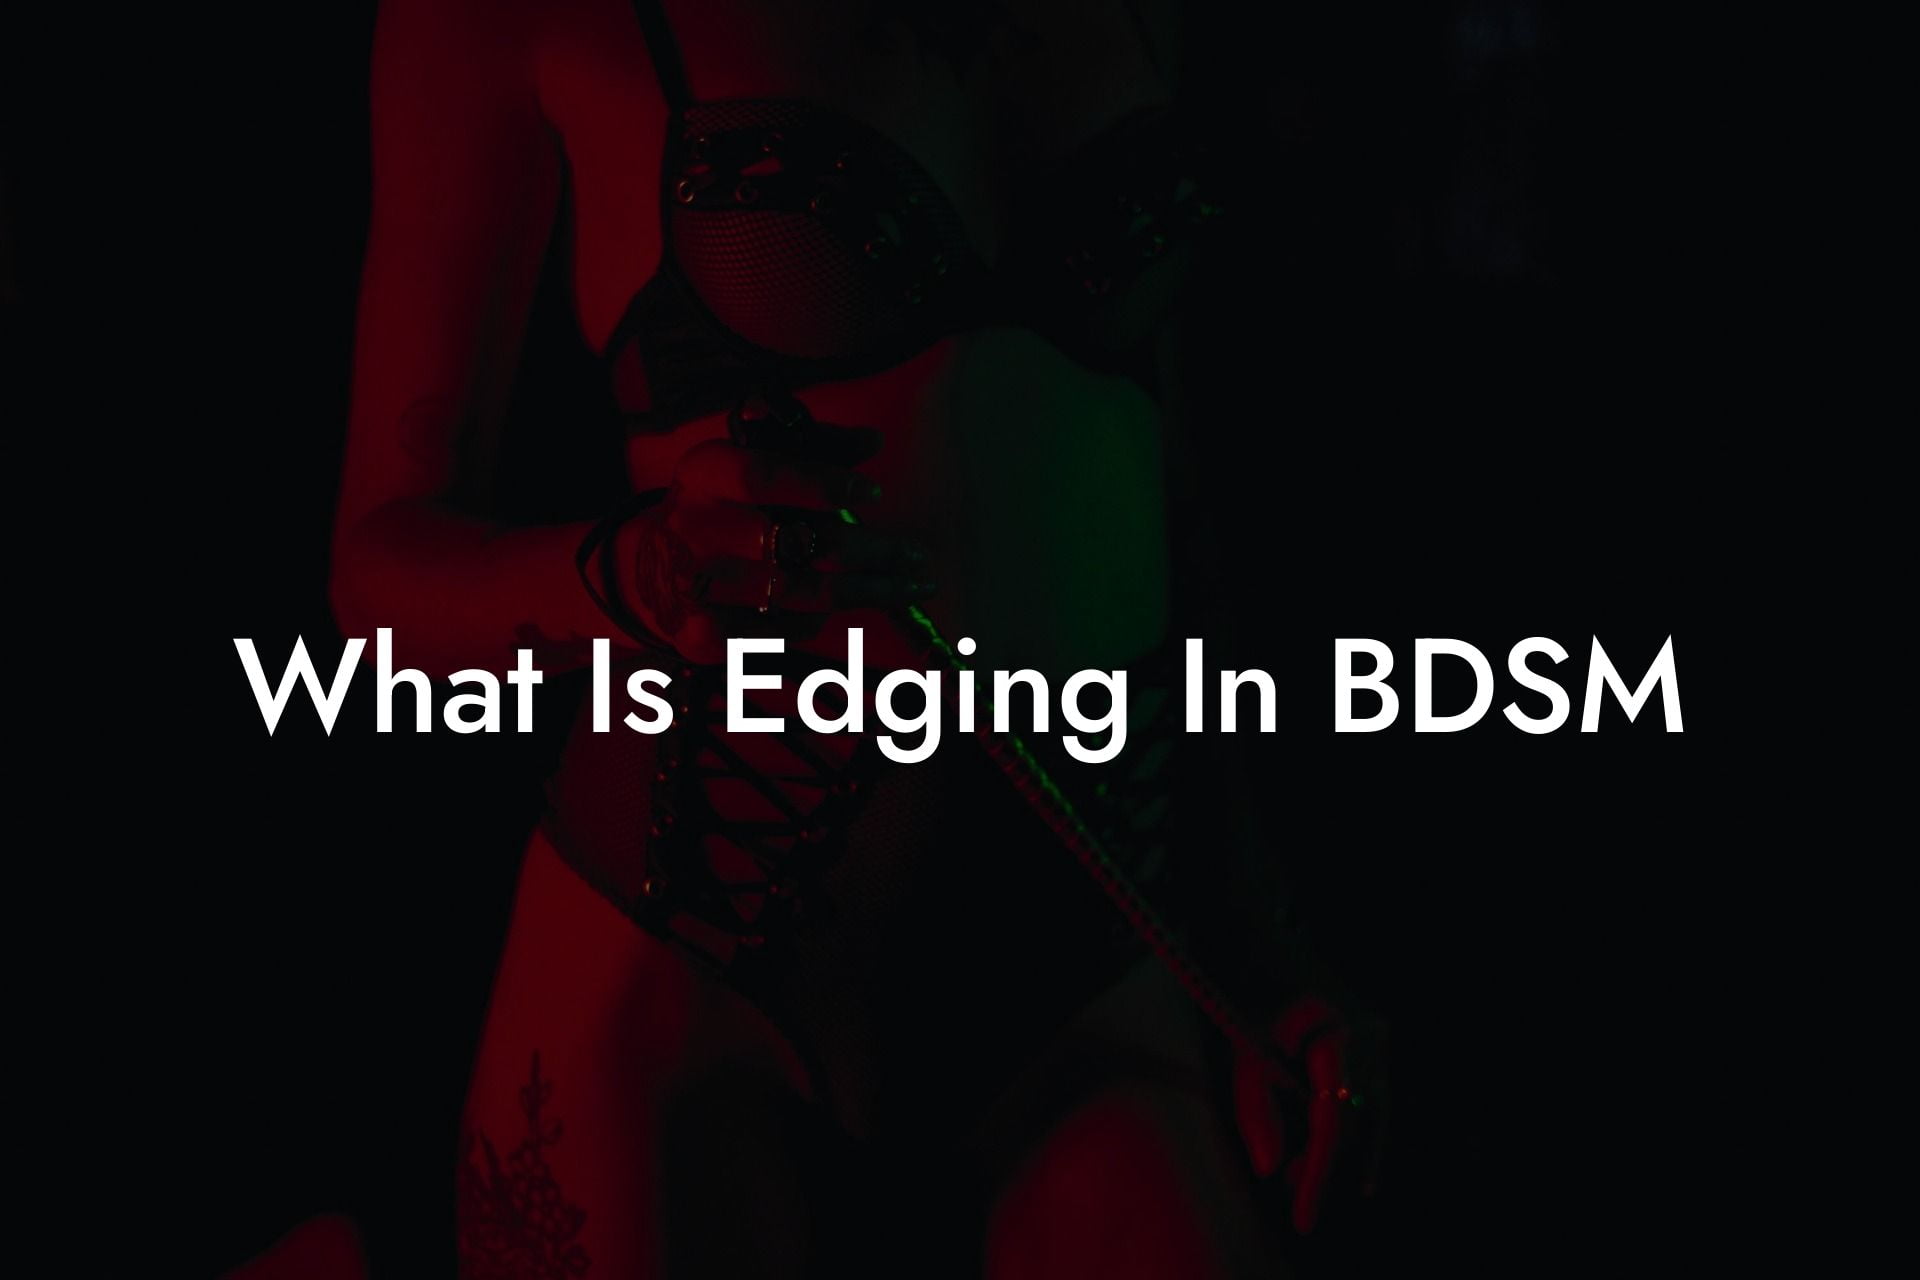 What Is Edging In BDSM